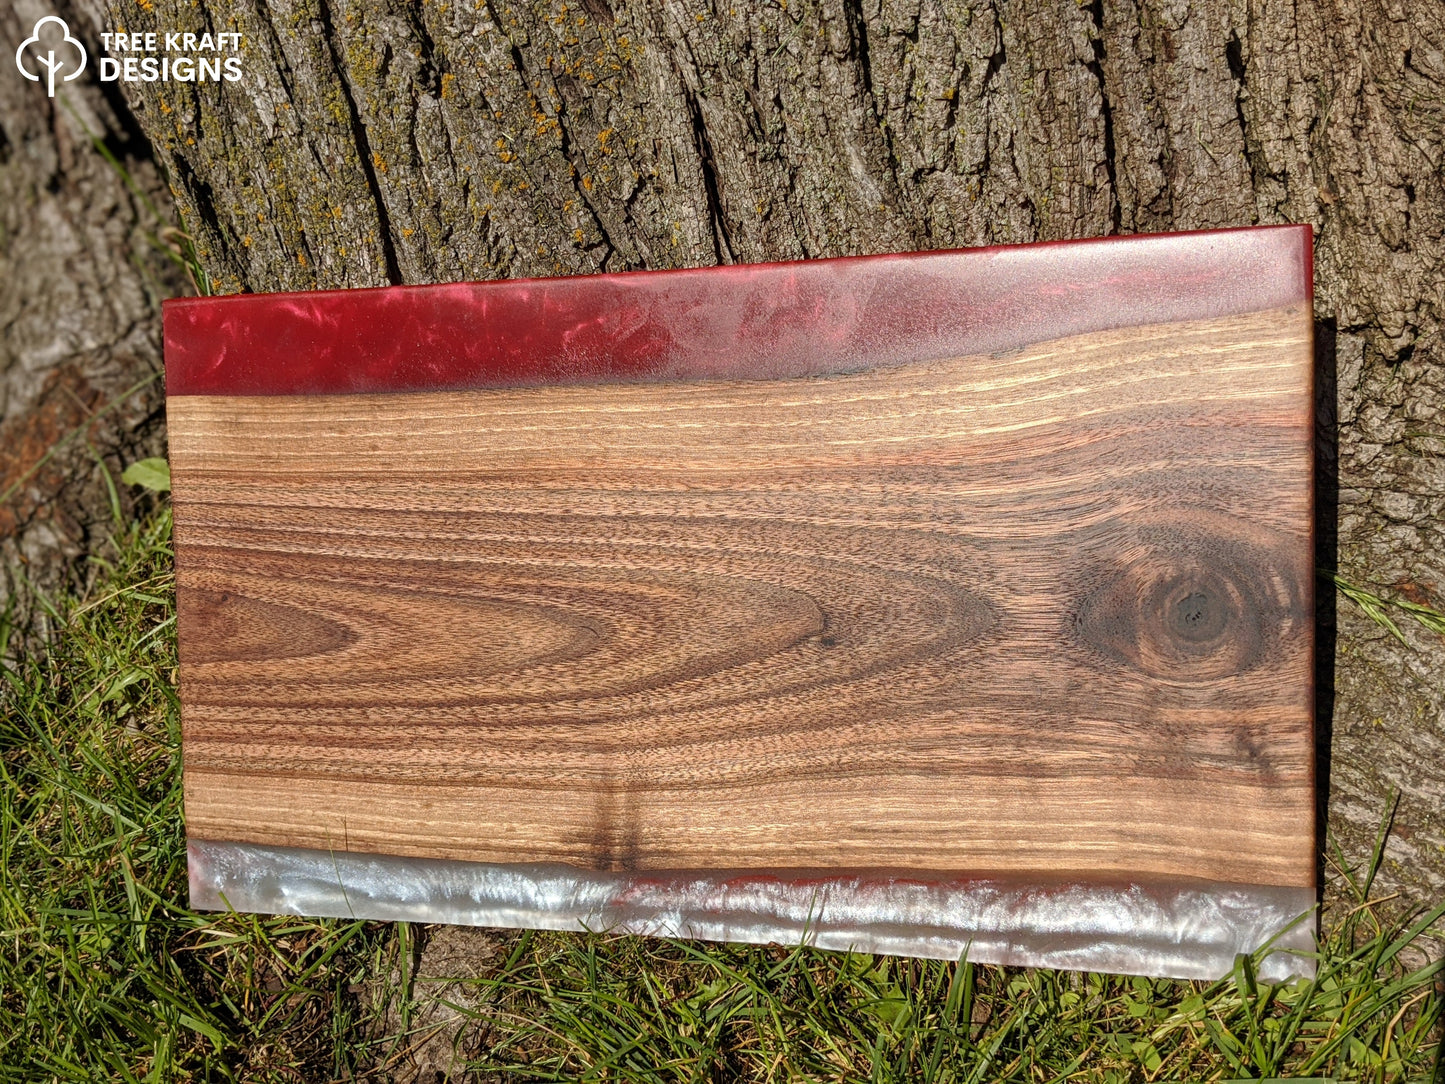 Dark Walnut with Red & White Epoxy with a Rustic Red Maple Leaf Epoxy Inlay